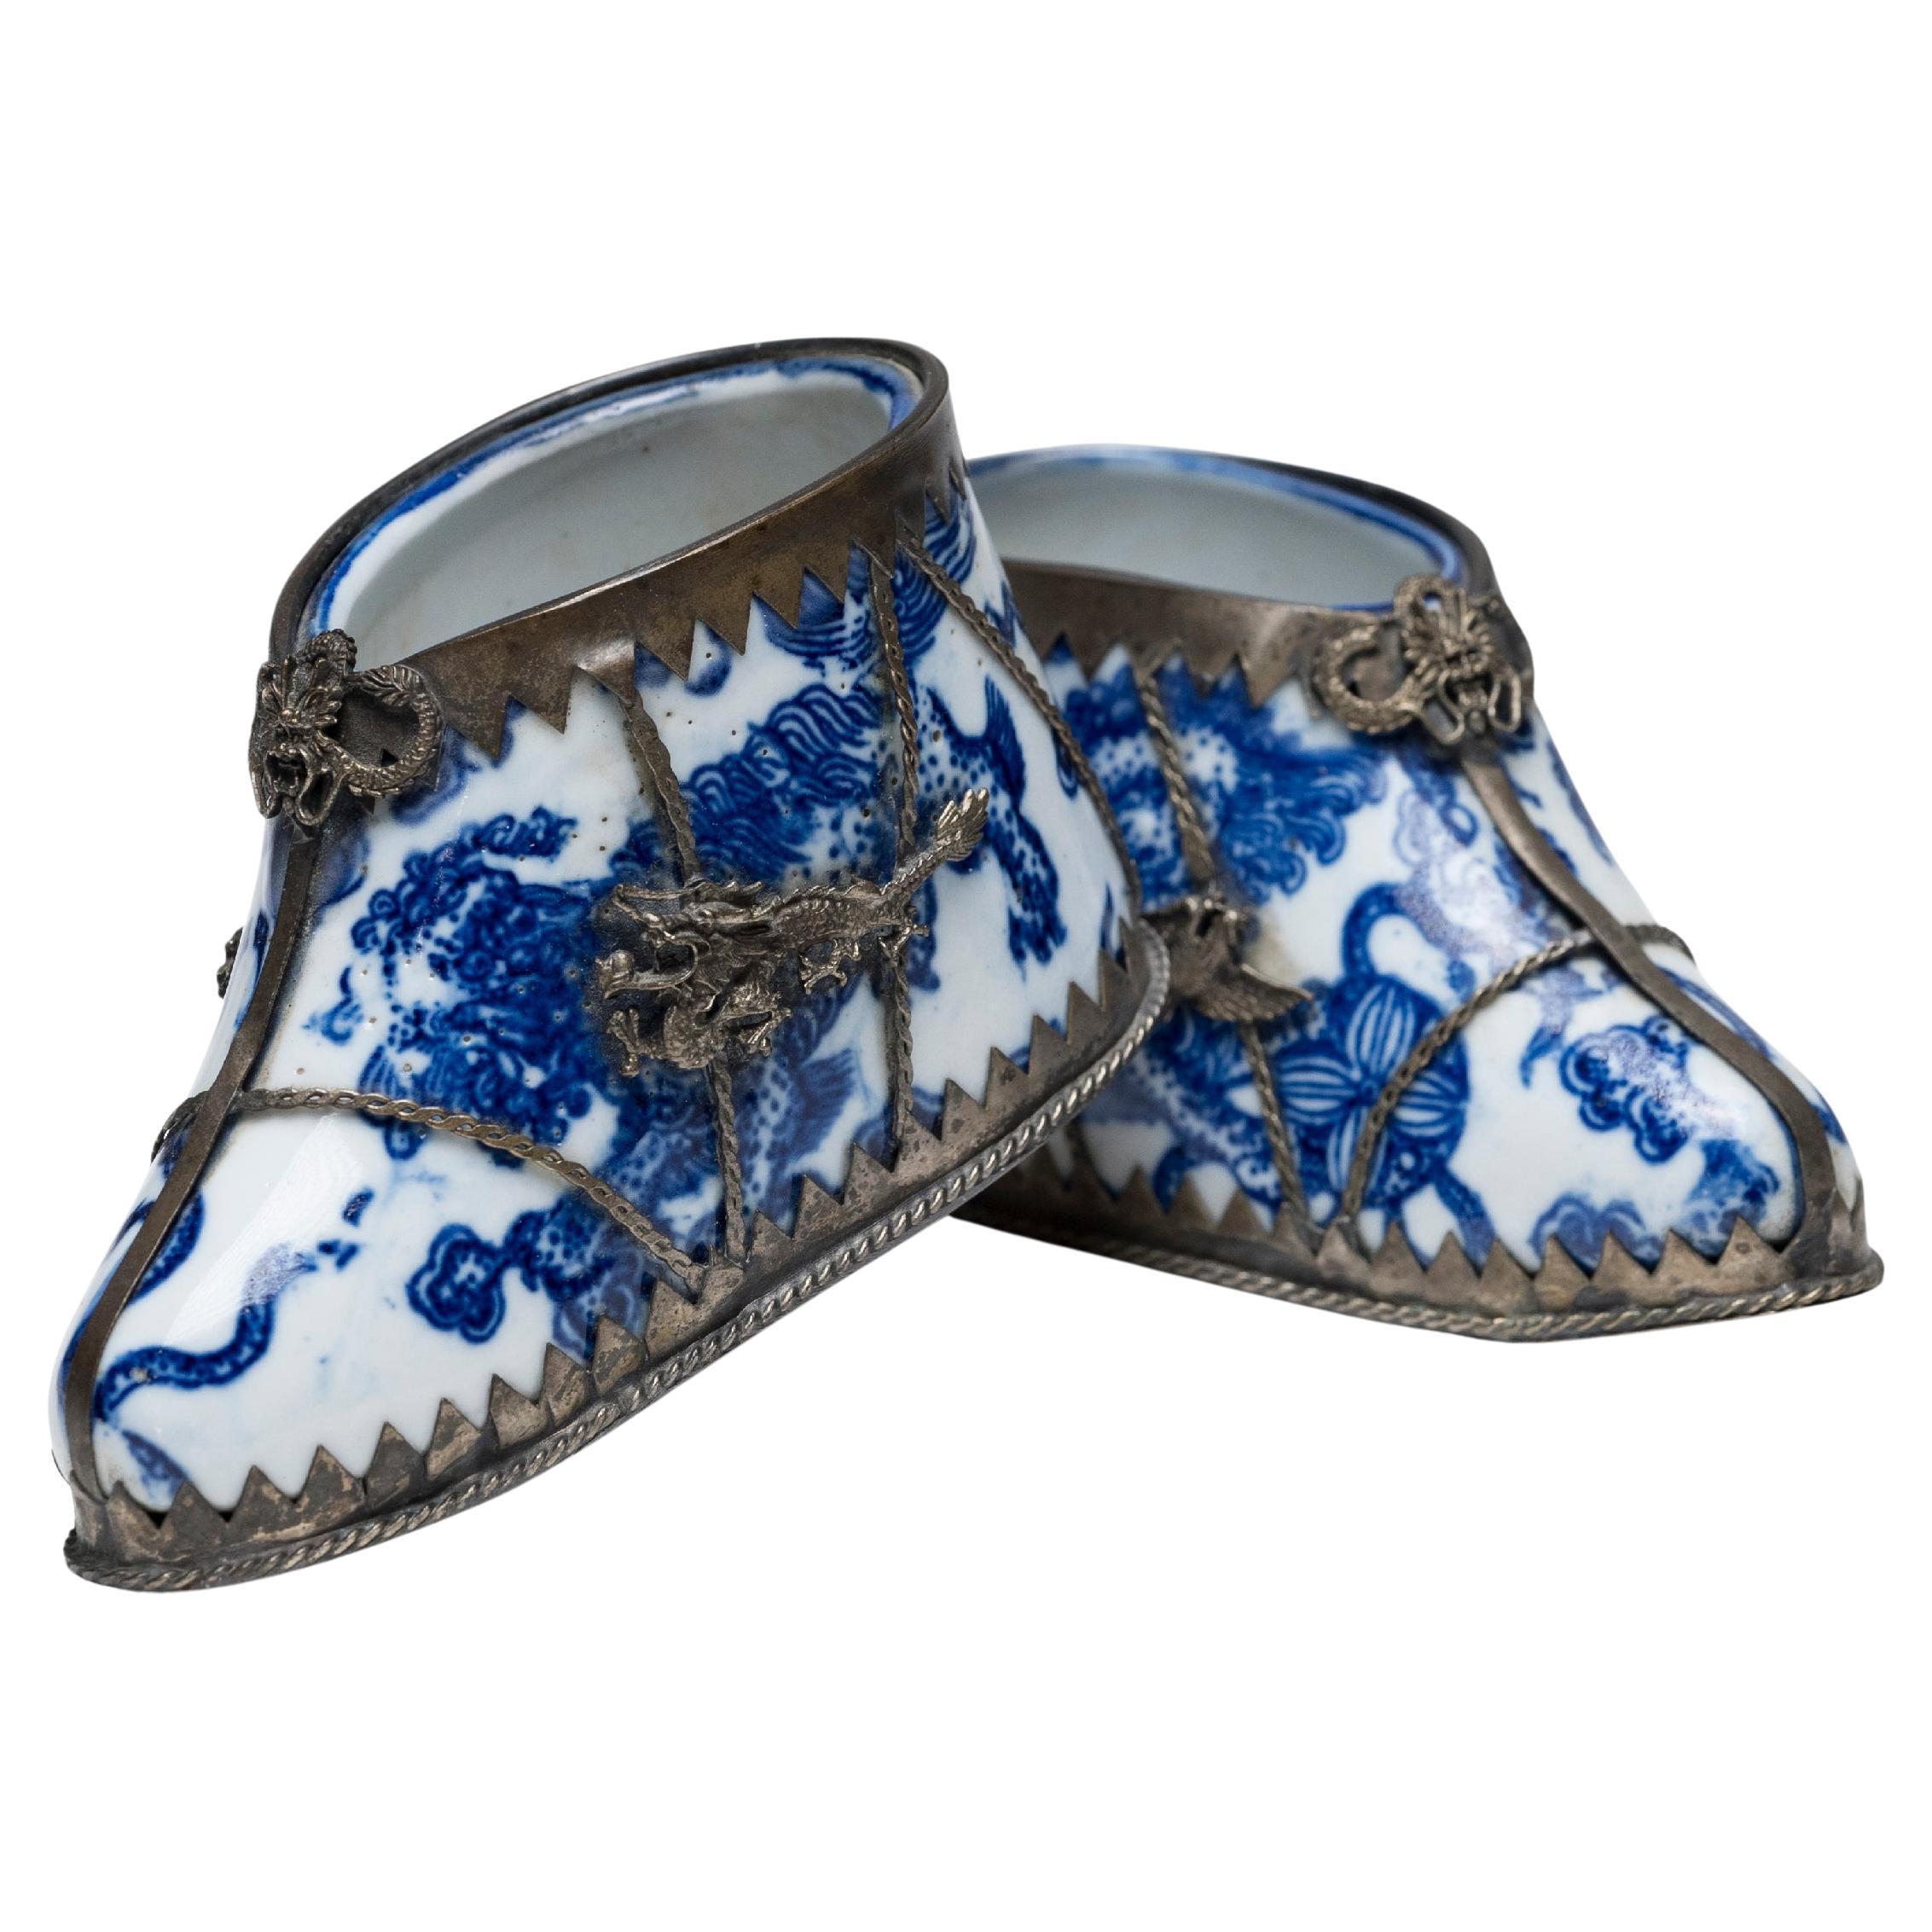 Pair of Chinese Blue and White Lotus Shoes, c. 1900